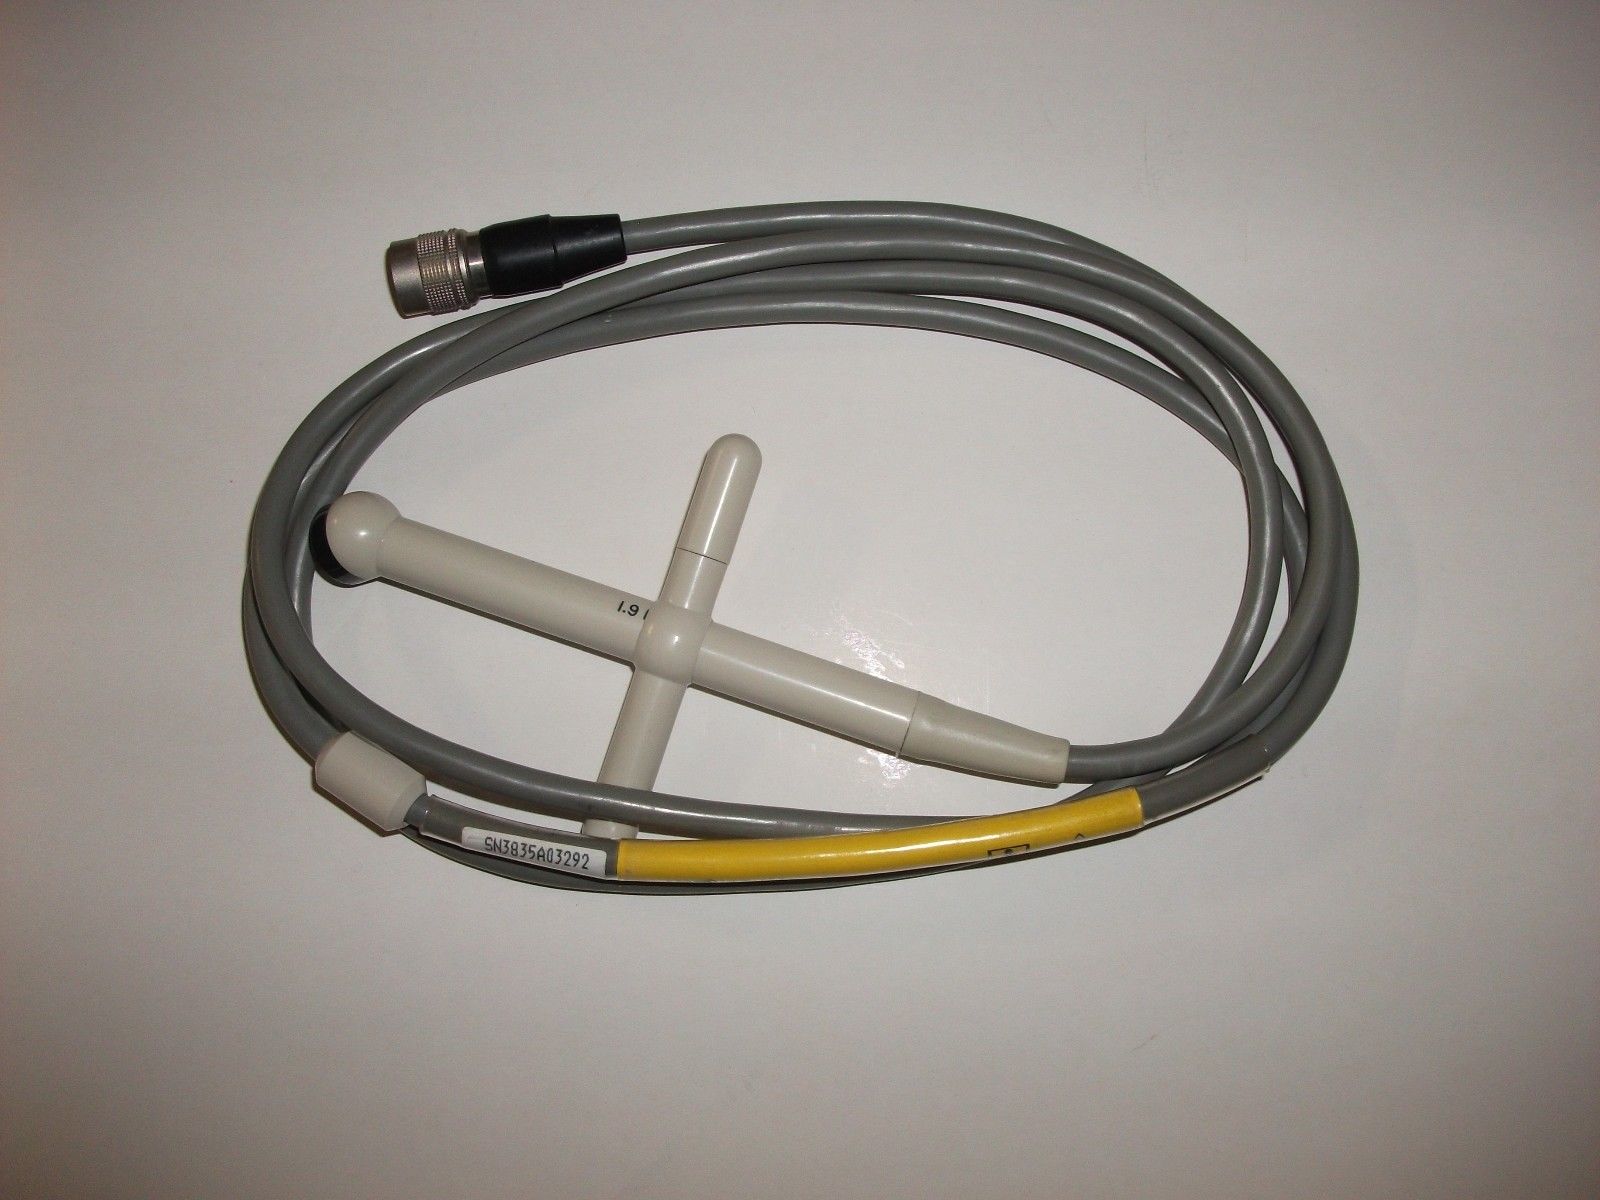 HP 21222A Transducer Probe for Ultrasound Systems